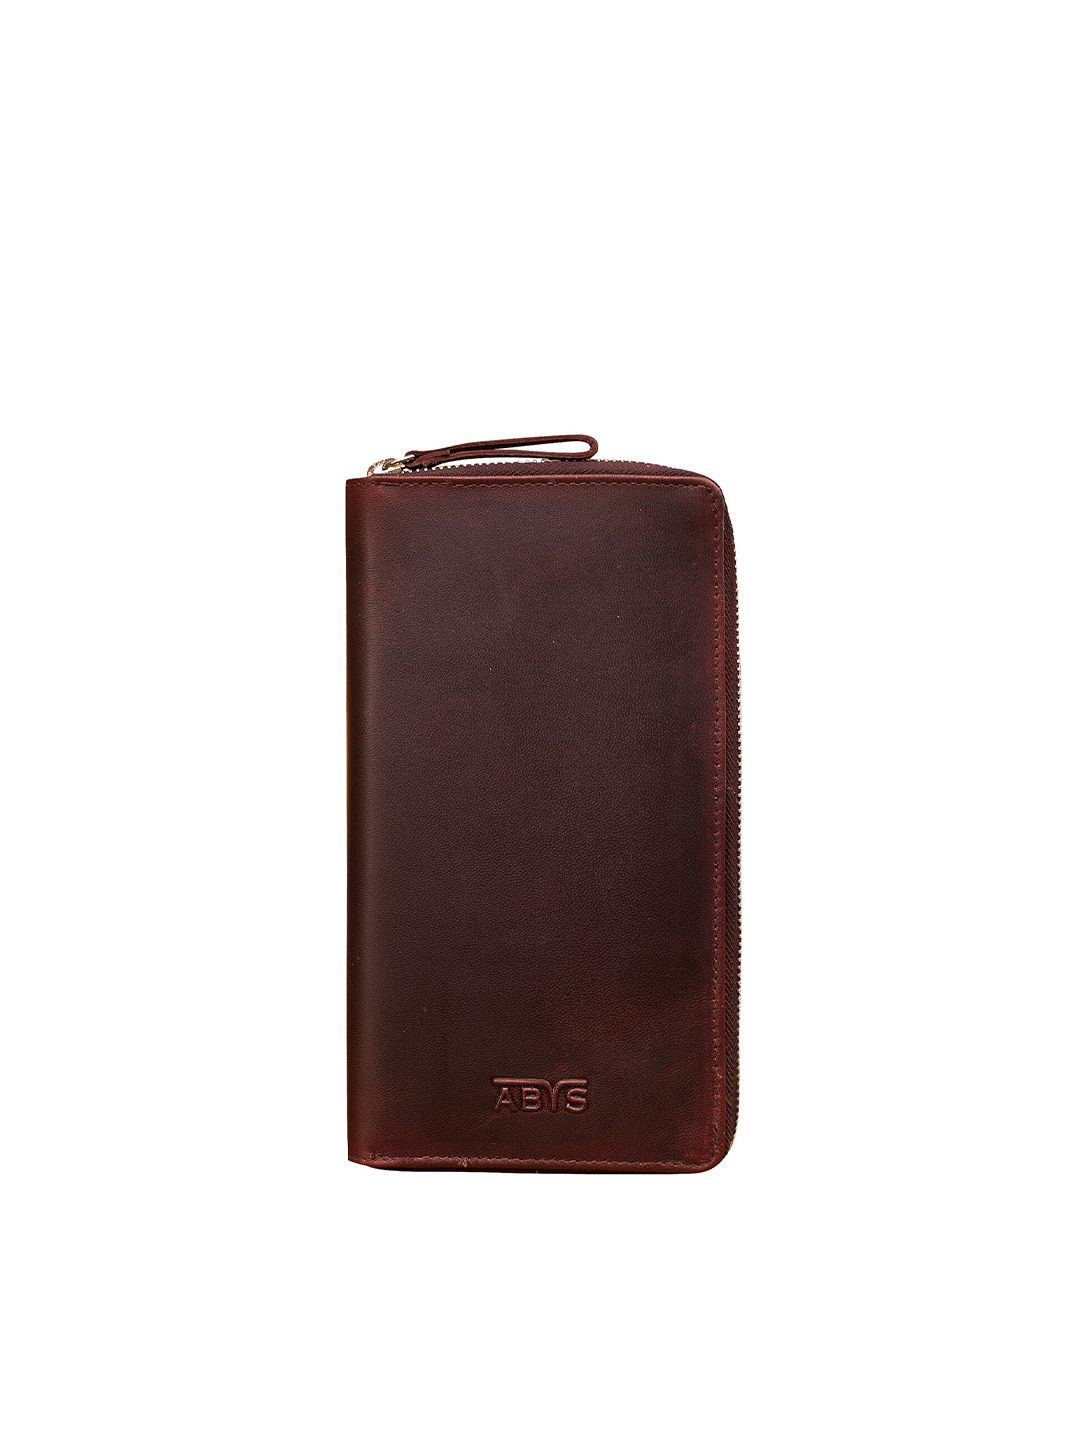 ABYS Unisex Brown Textured Leather Passport Holder Price in India